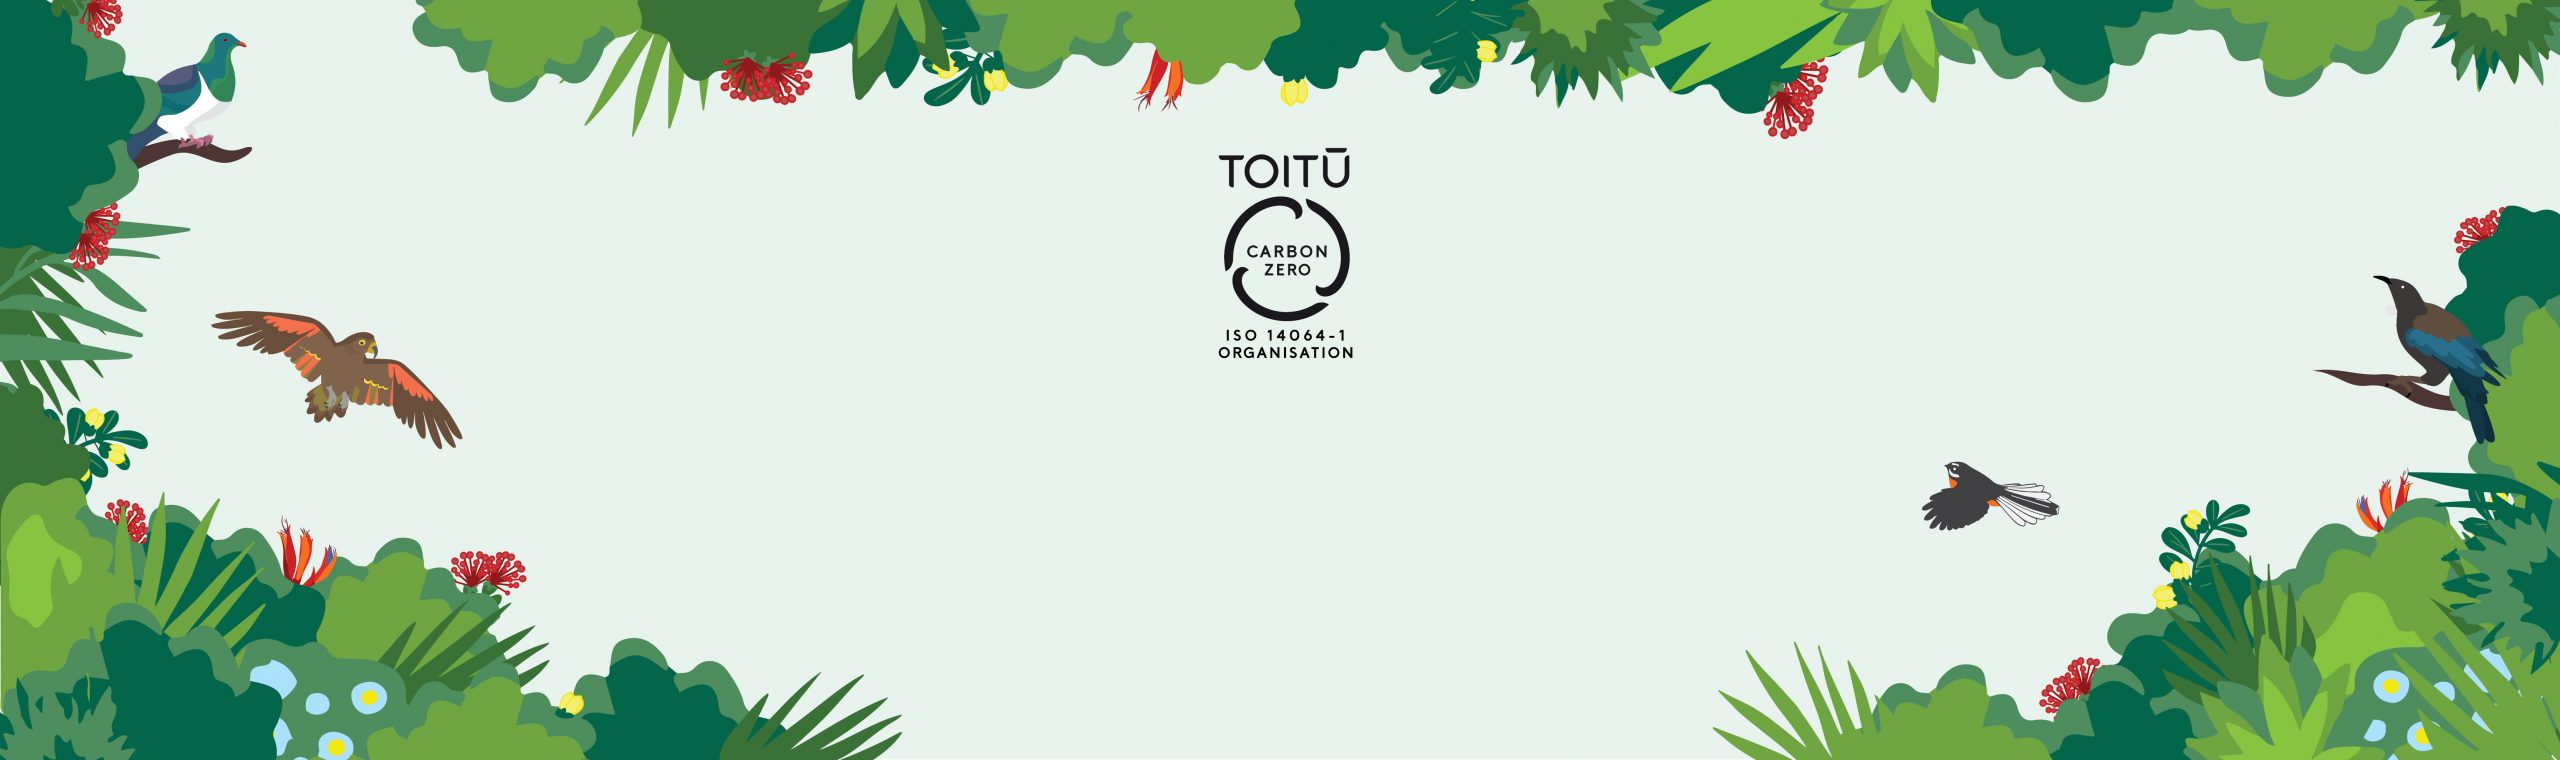 We’re now Toitū carbonzero certified